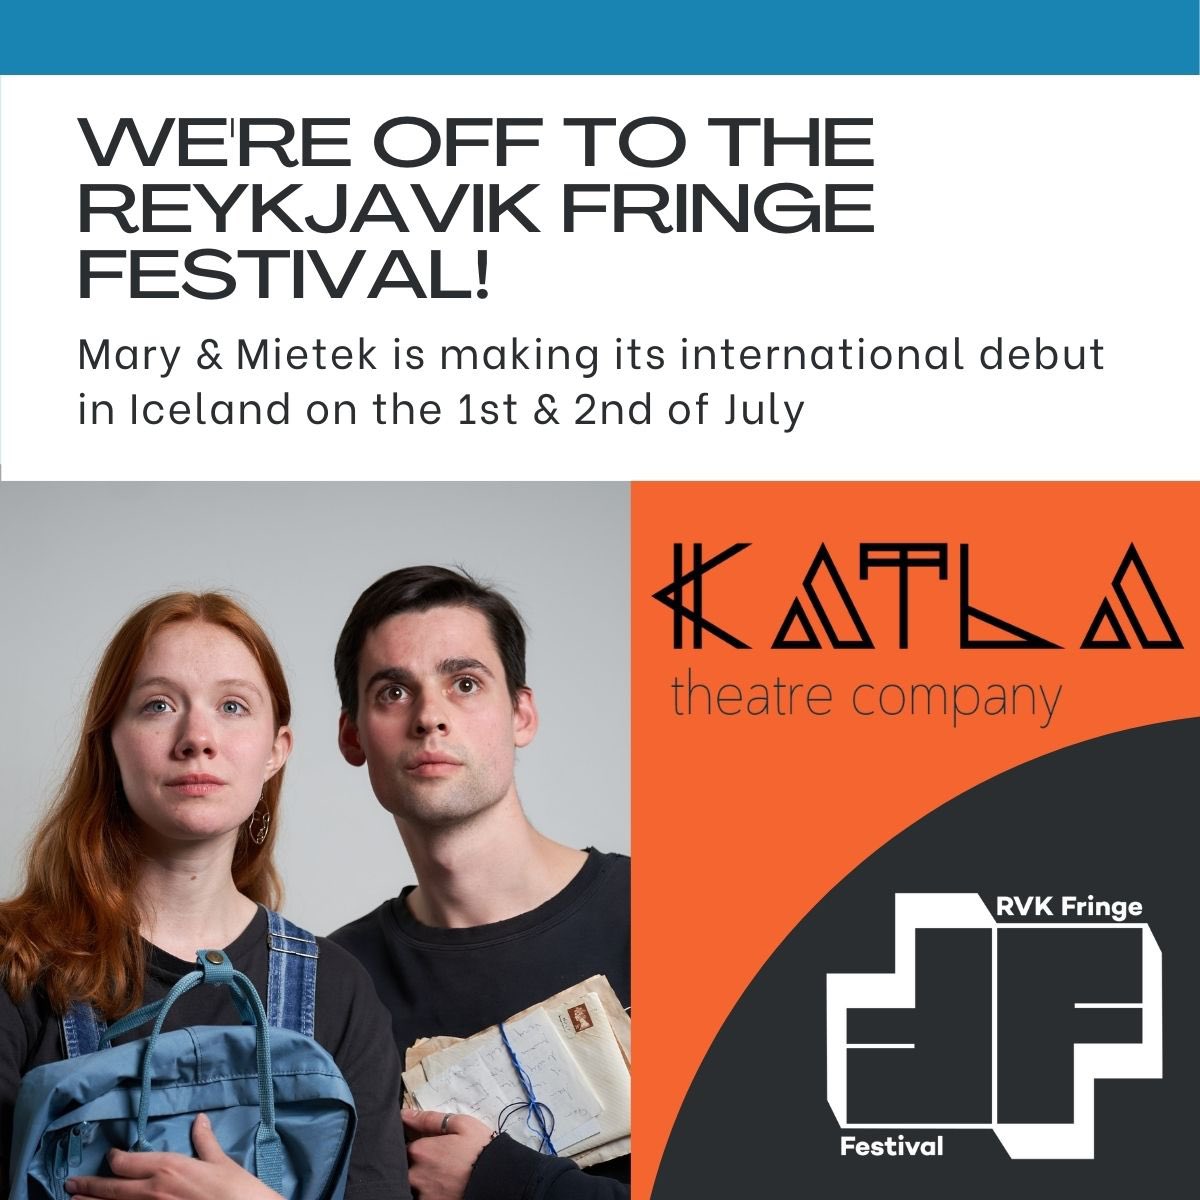 Katla Theater with “Mary and Mietek” in Reykjavik